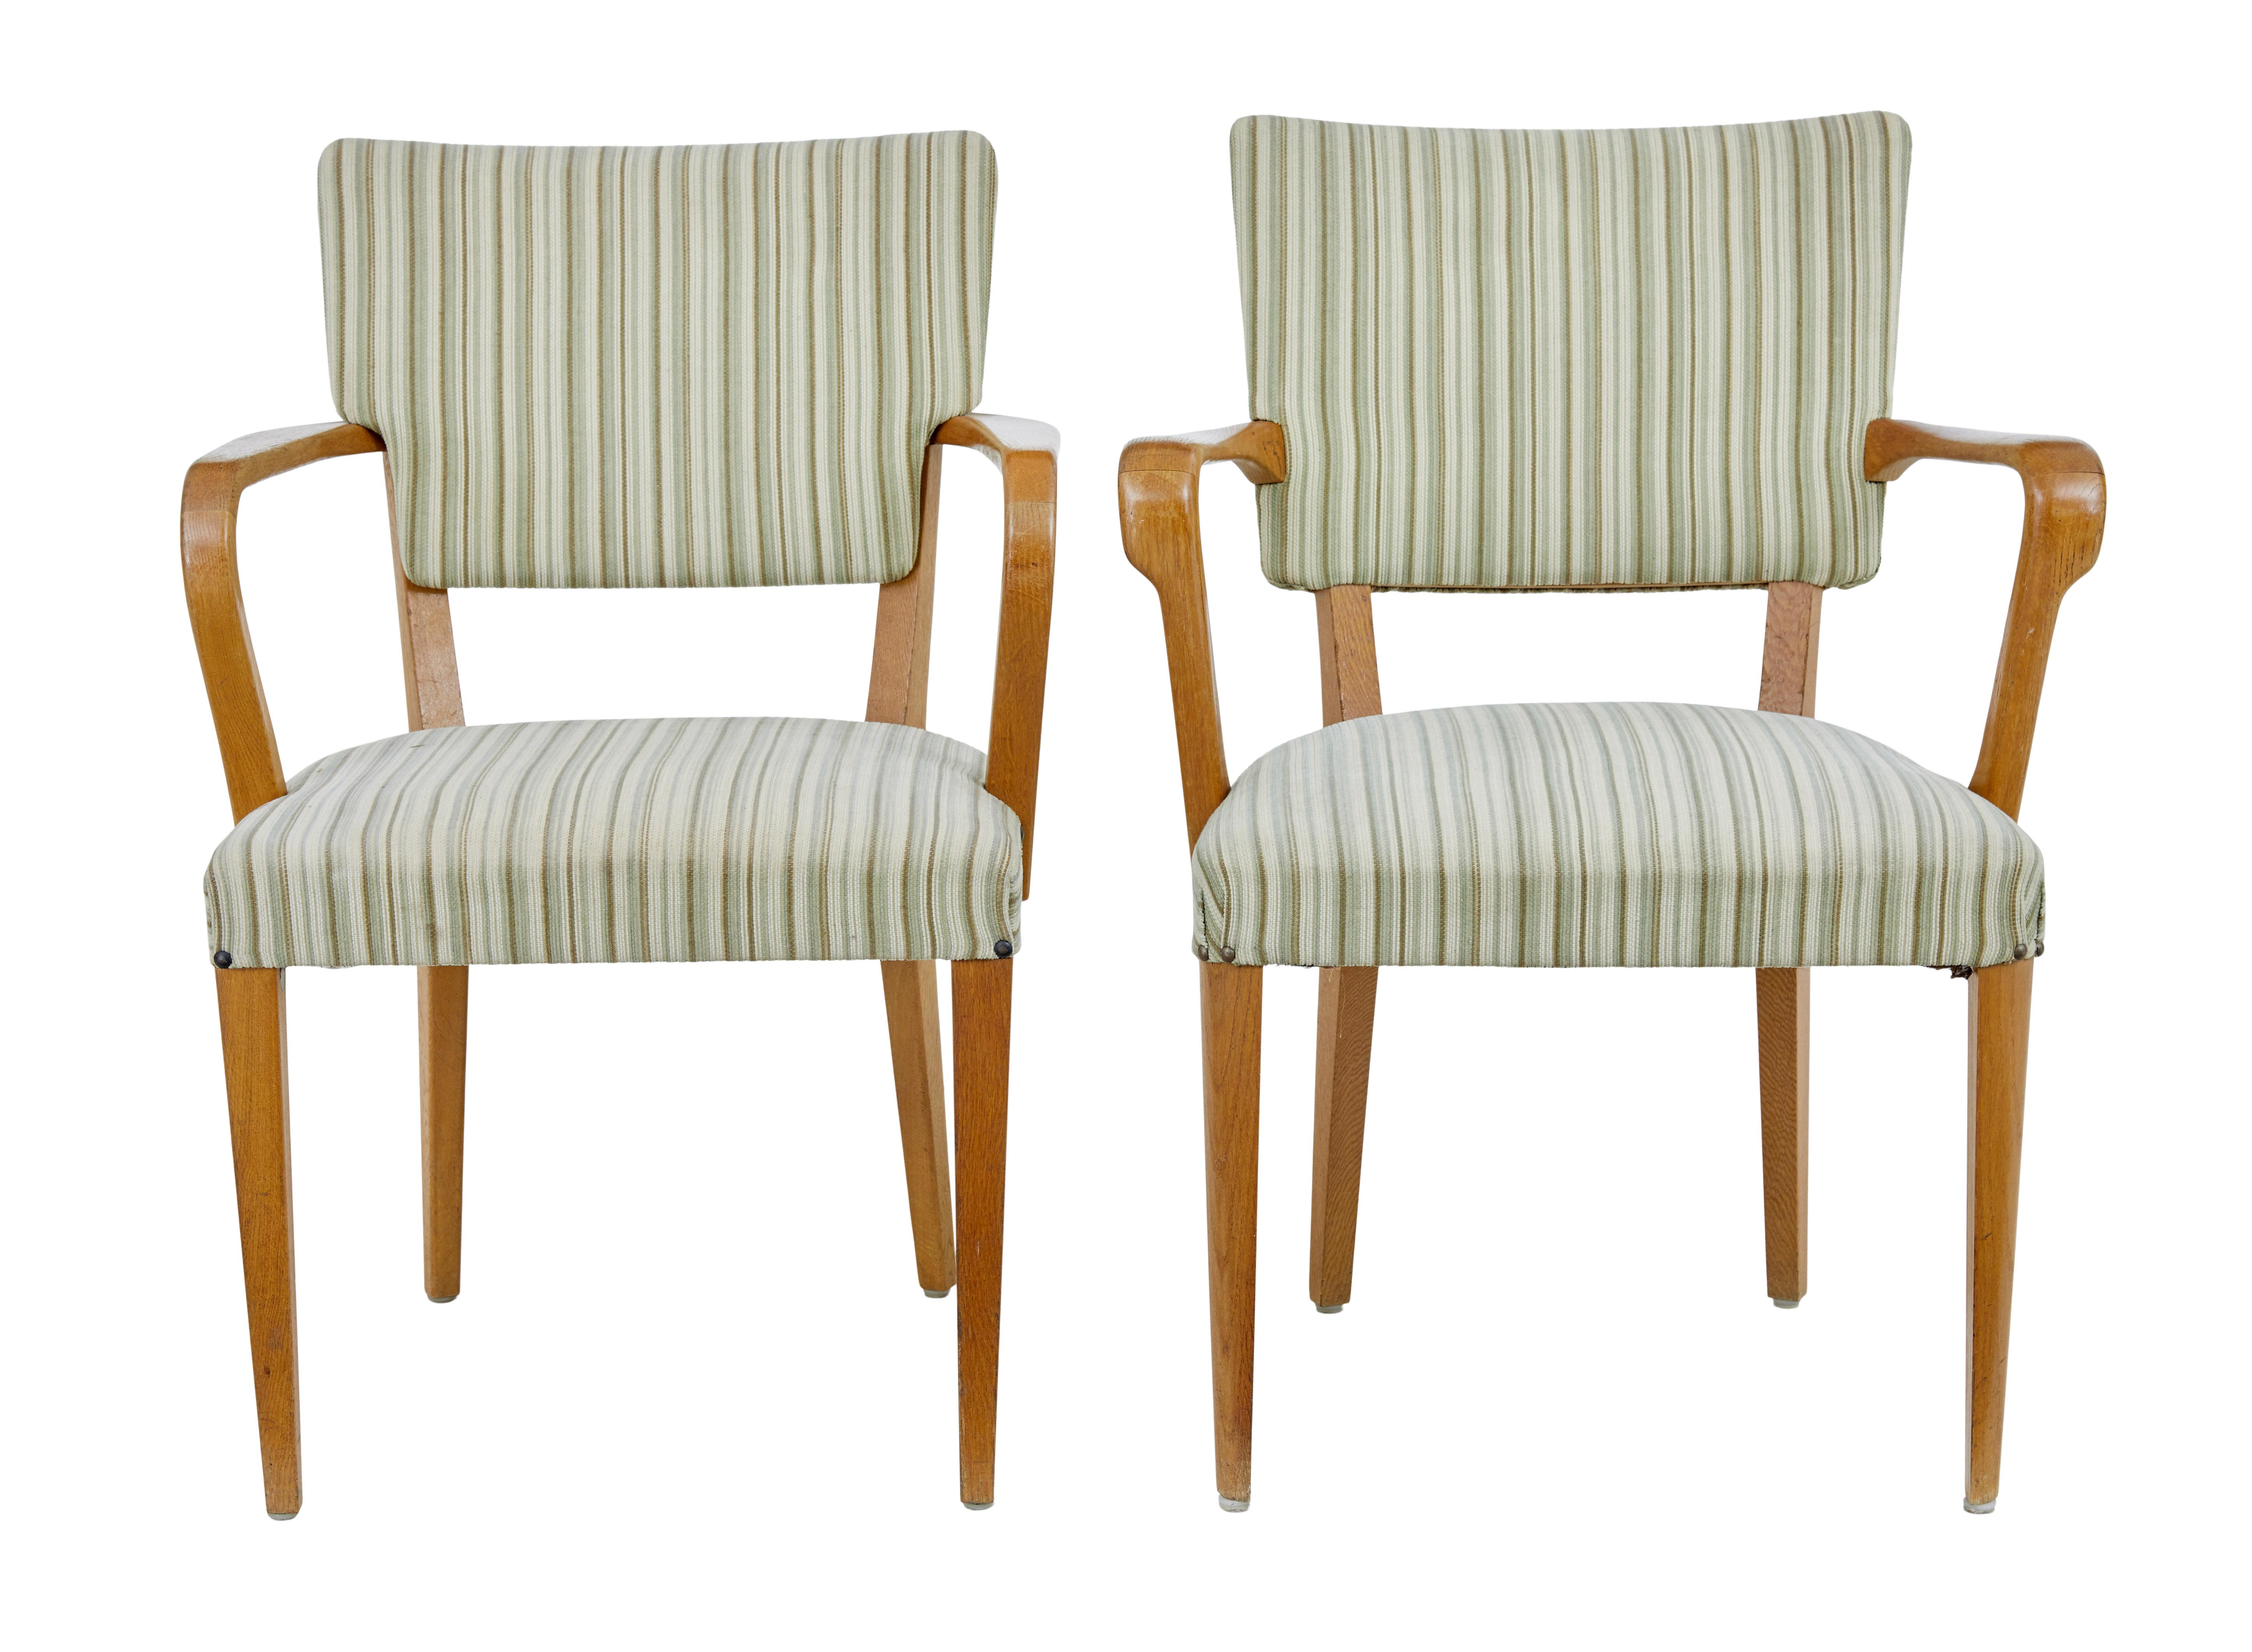 Harlequin set of 6 elm Swedish 1960’s armchairs by atvidabergs circa 1970

Comfortable 1970's set of 6 chairs, which comprise of 4 of 1 design and 2 in another, an example of each has been photographed side by side for comparison.  These have always